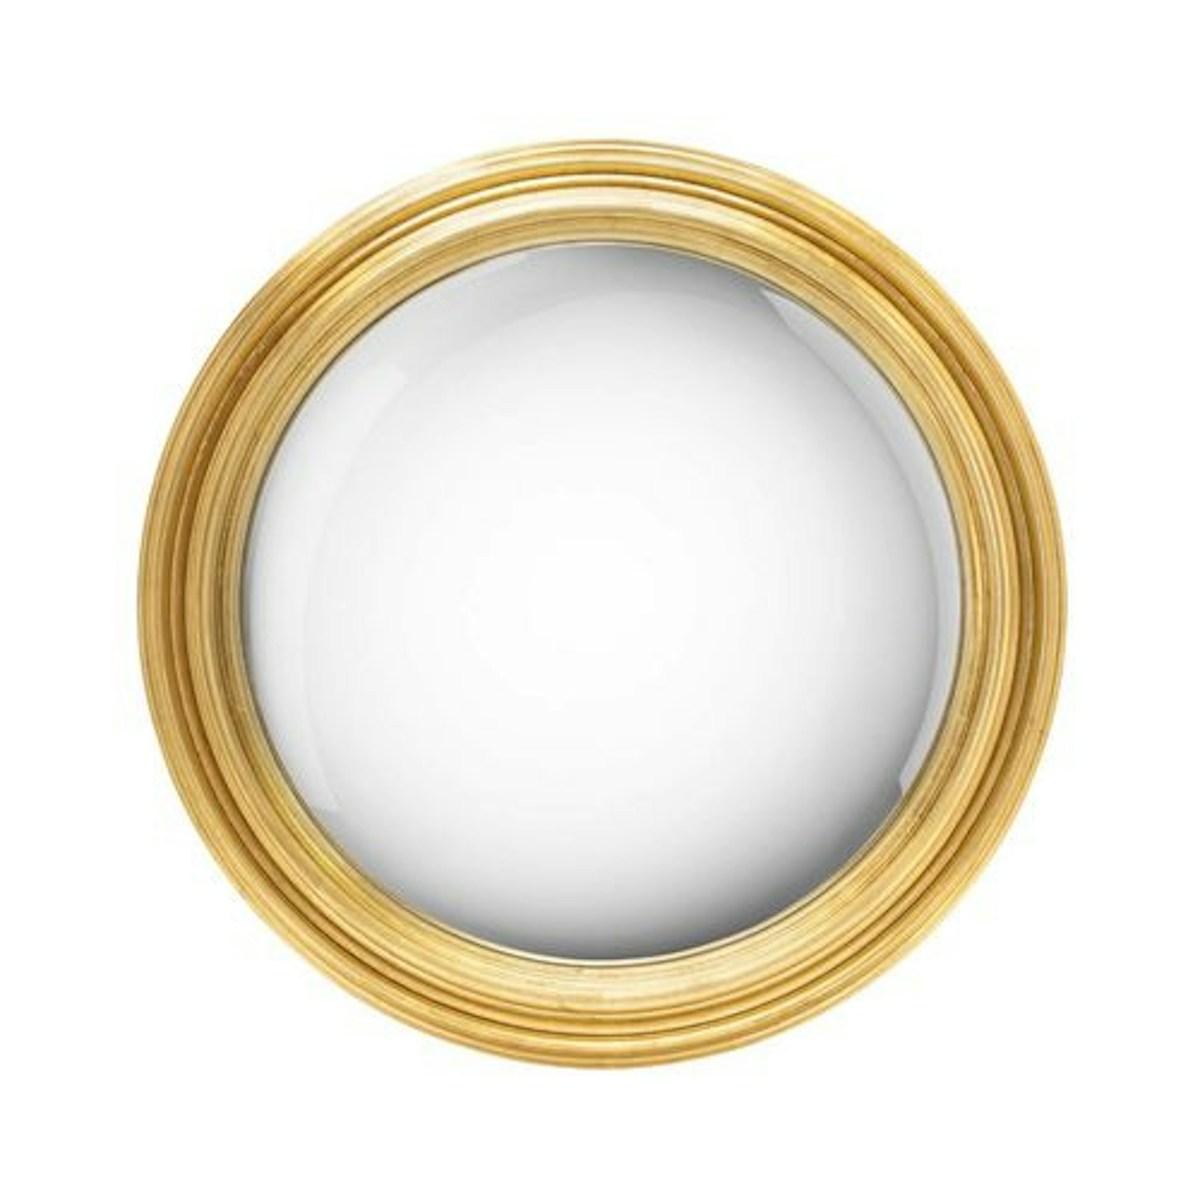 Gold Convex Mirror - 9 Best Statement Wall Mirrors To Hang In Your Home - LuxDeco.com